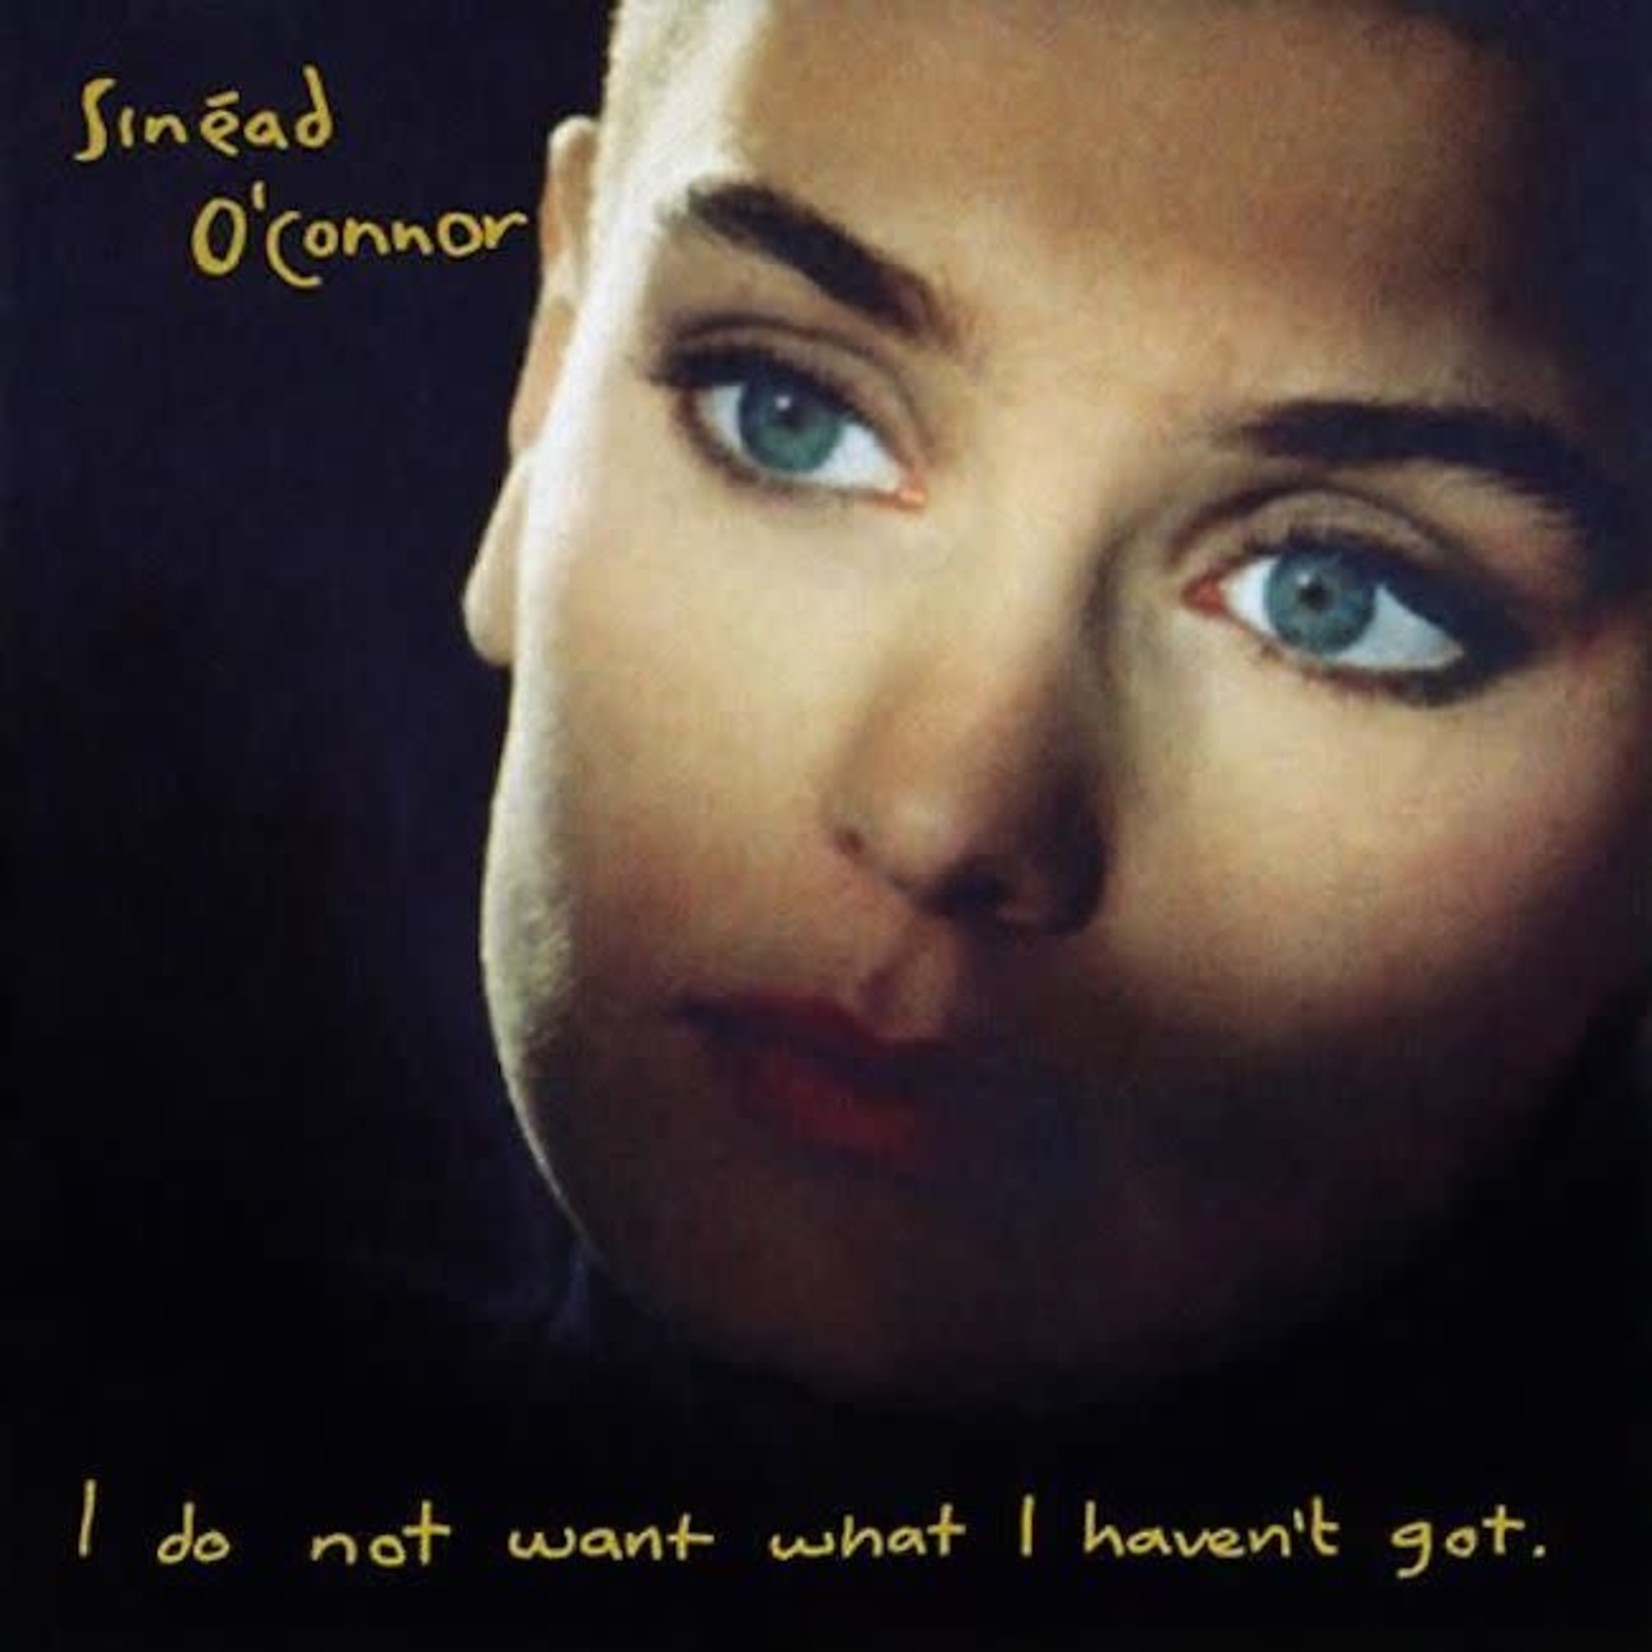 [Vintage] Sinead O'Connor - I Do Not Want What I Haven't Got